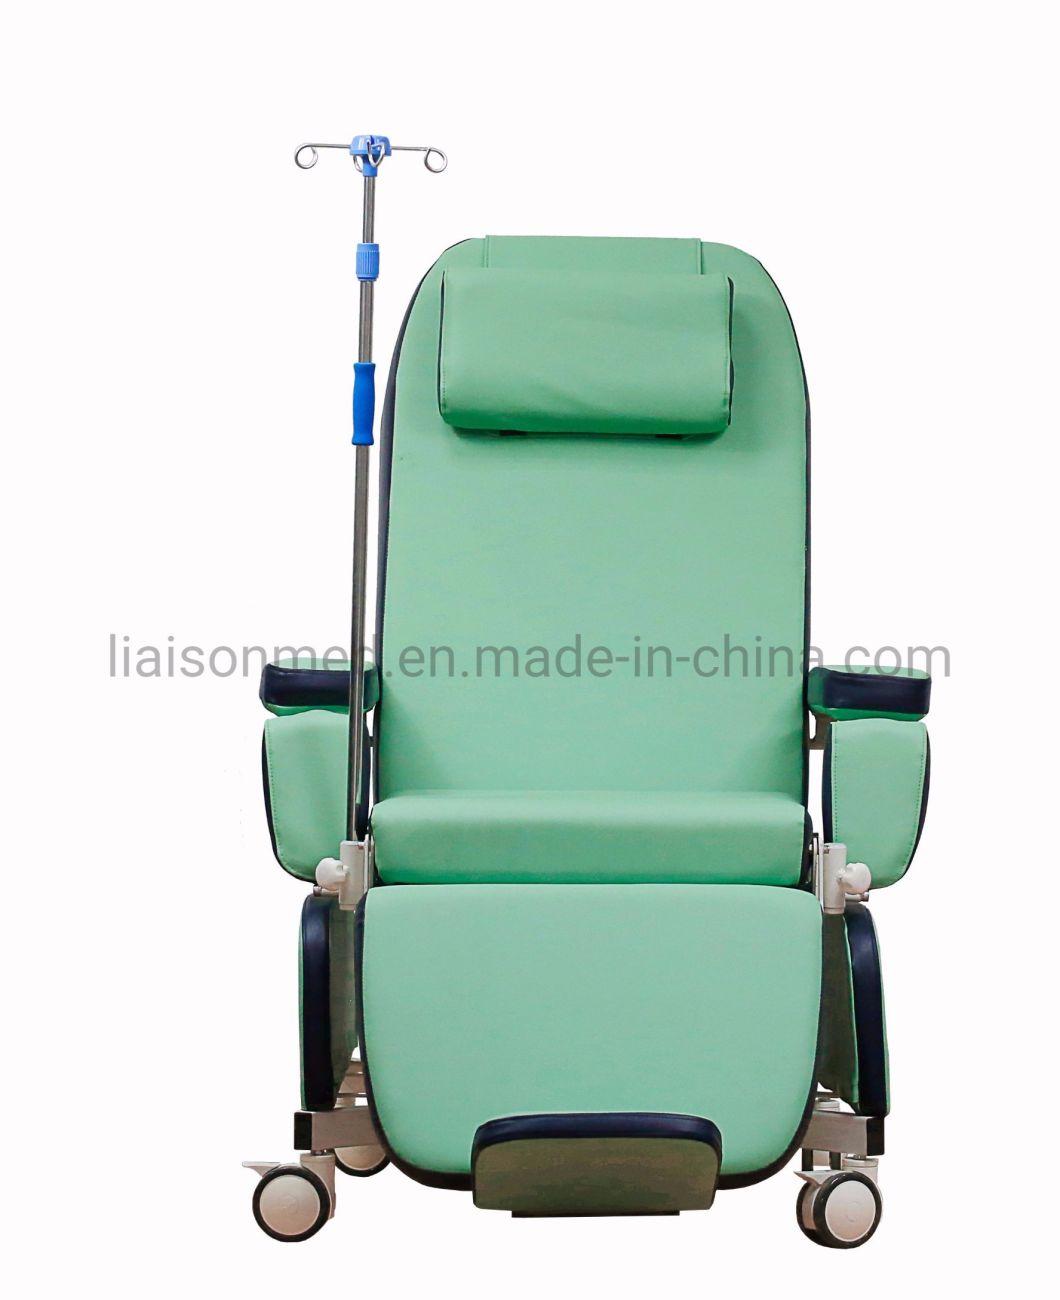 Mn-Bdc002 Hospital Patients Electric Treatment Dialysis Chair with IV Pole